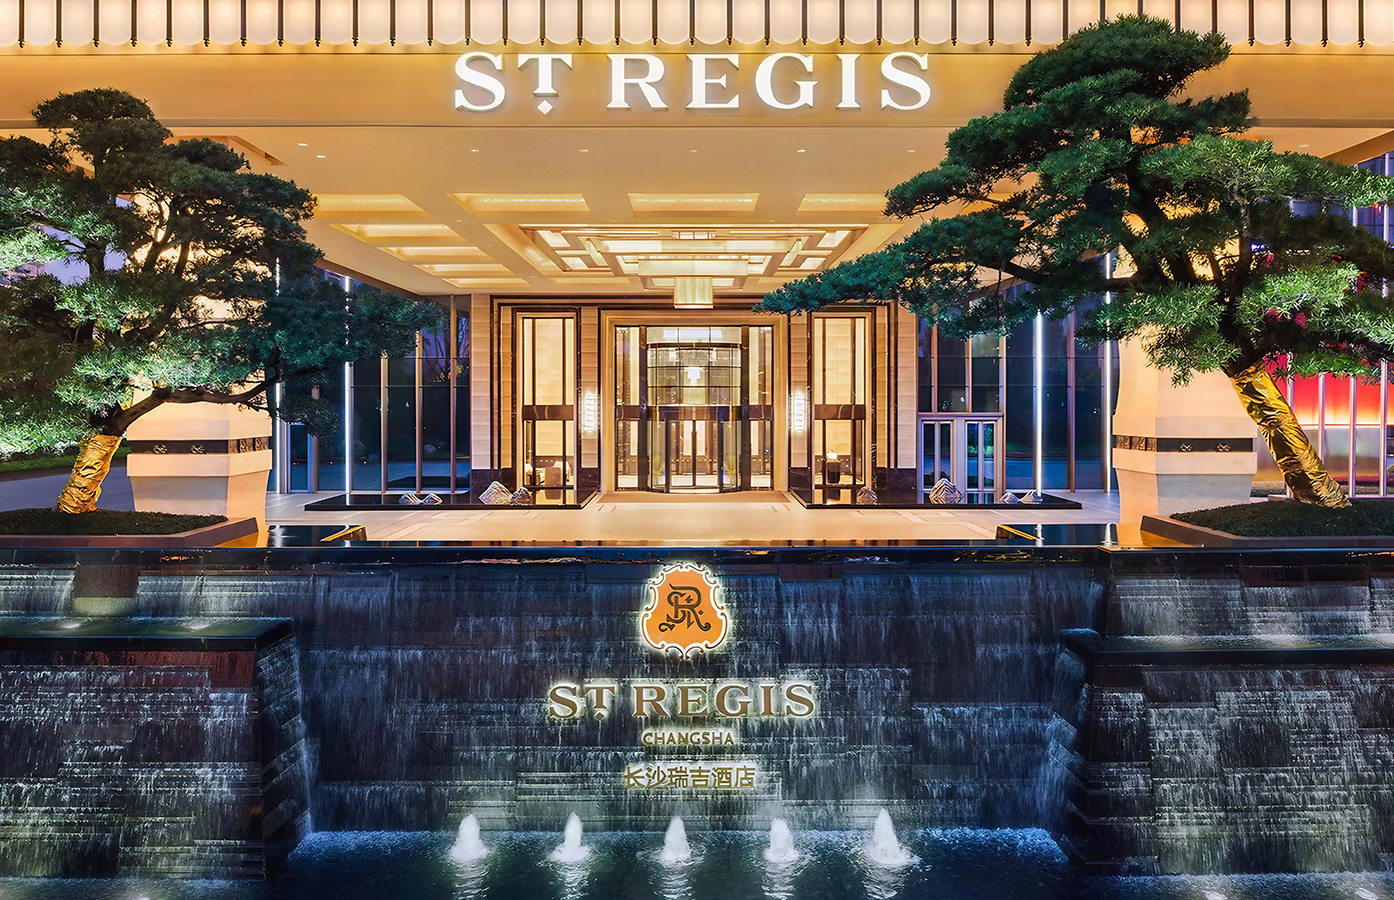 The St. Regis Changsha Hotel Contract Project from Artie Garden